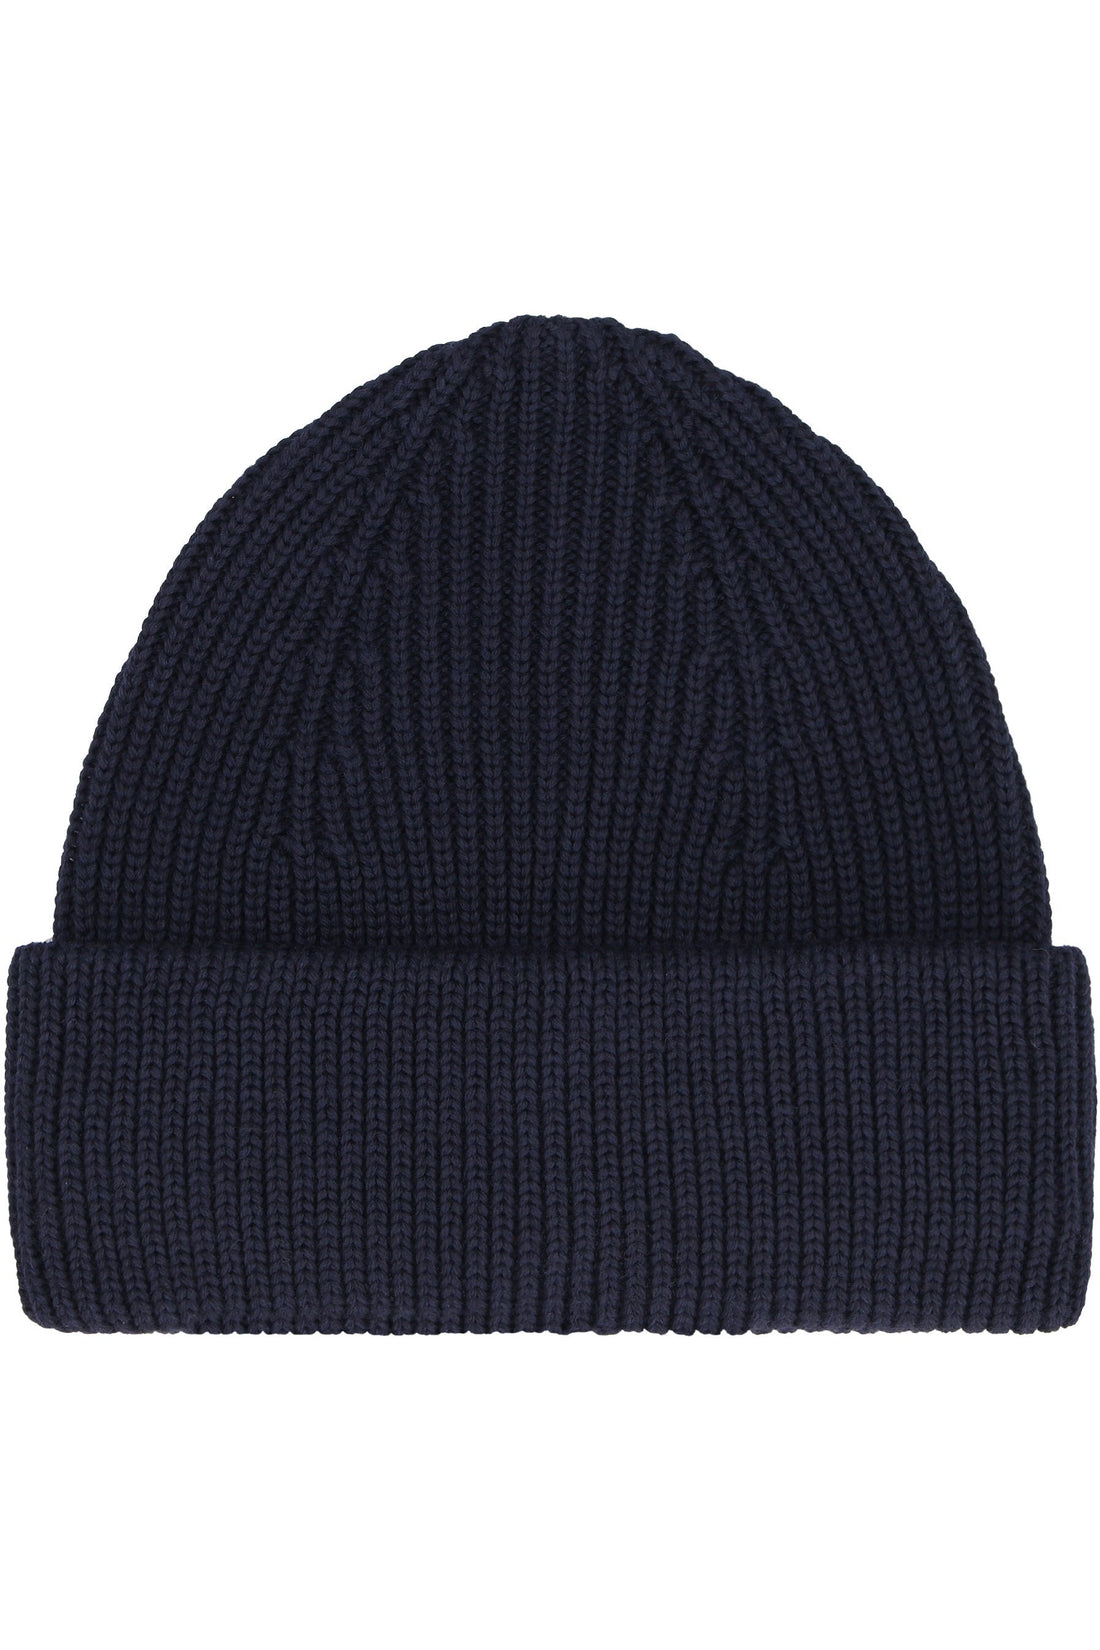 Roberto Collina-OUTLET-SALE-Knitted wool beanie hat-ARCHIVIST